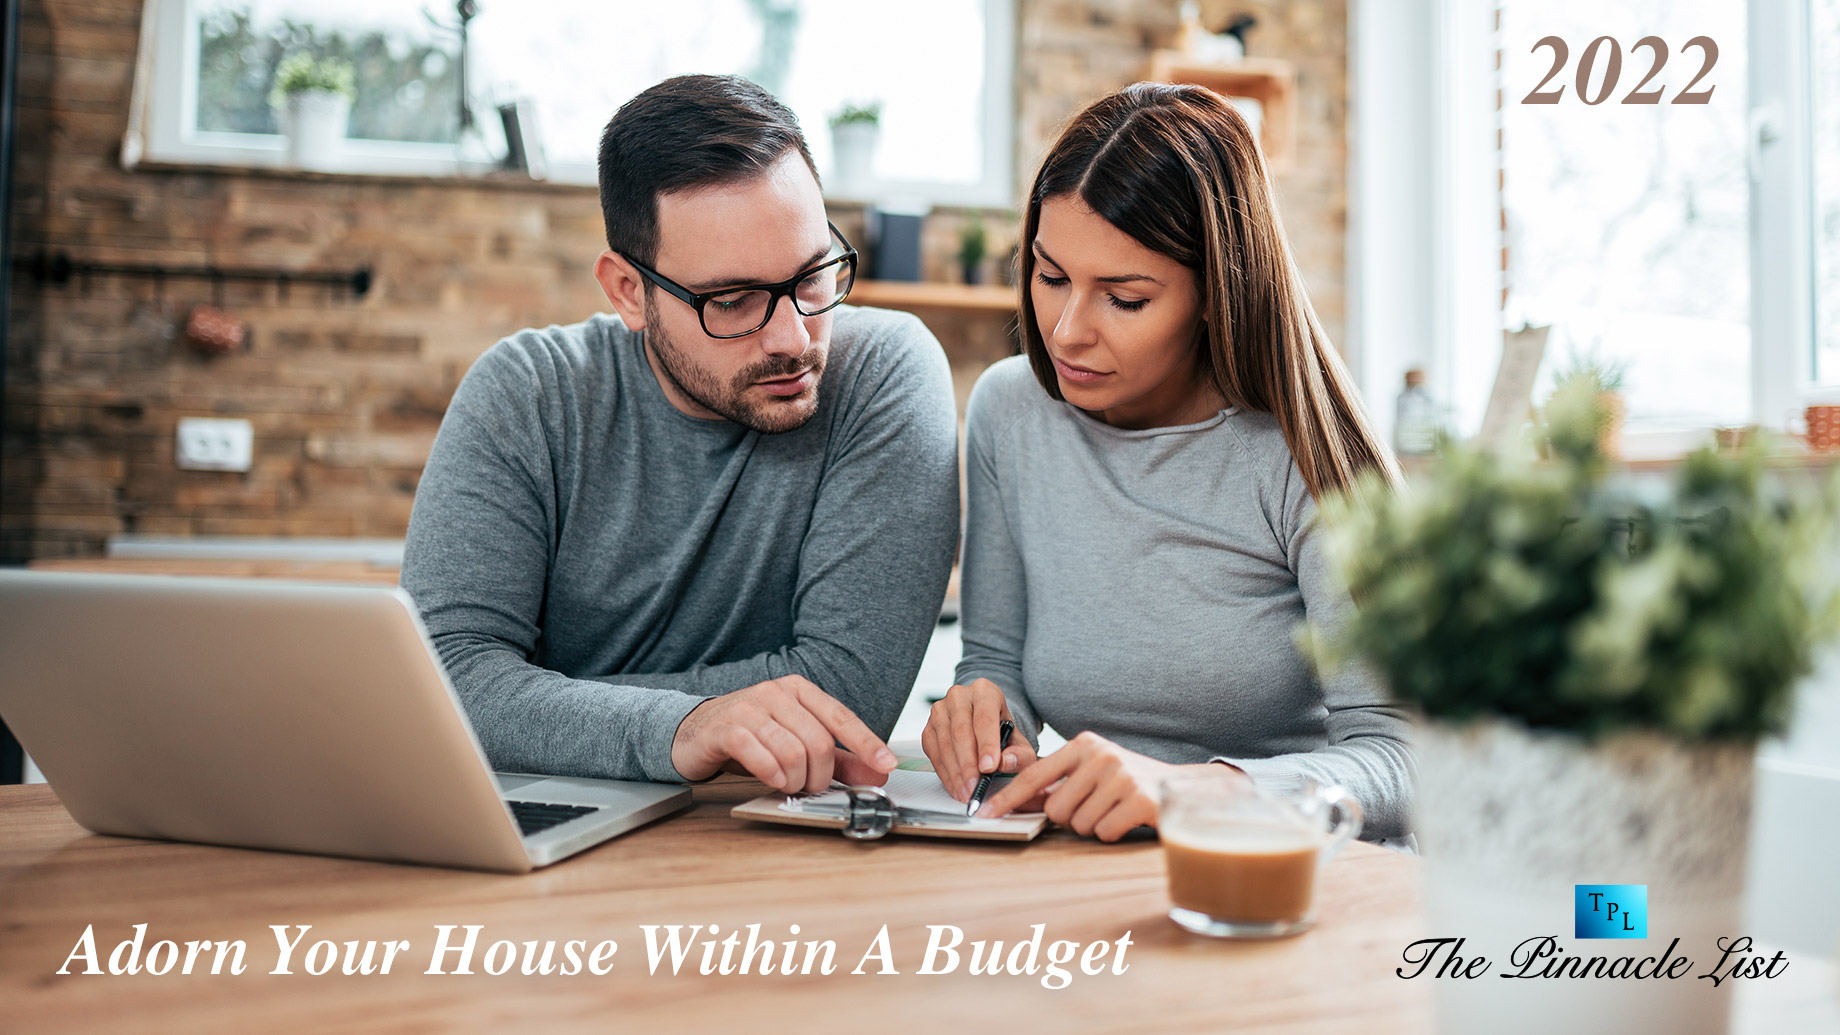 Adorn Your House Within A Budget In 2022